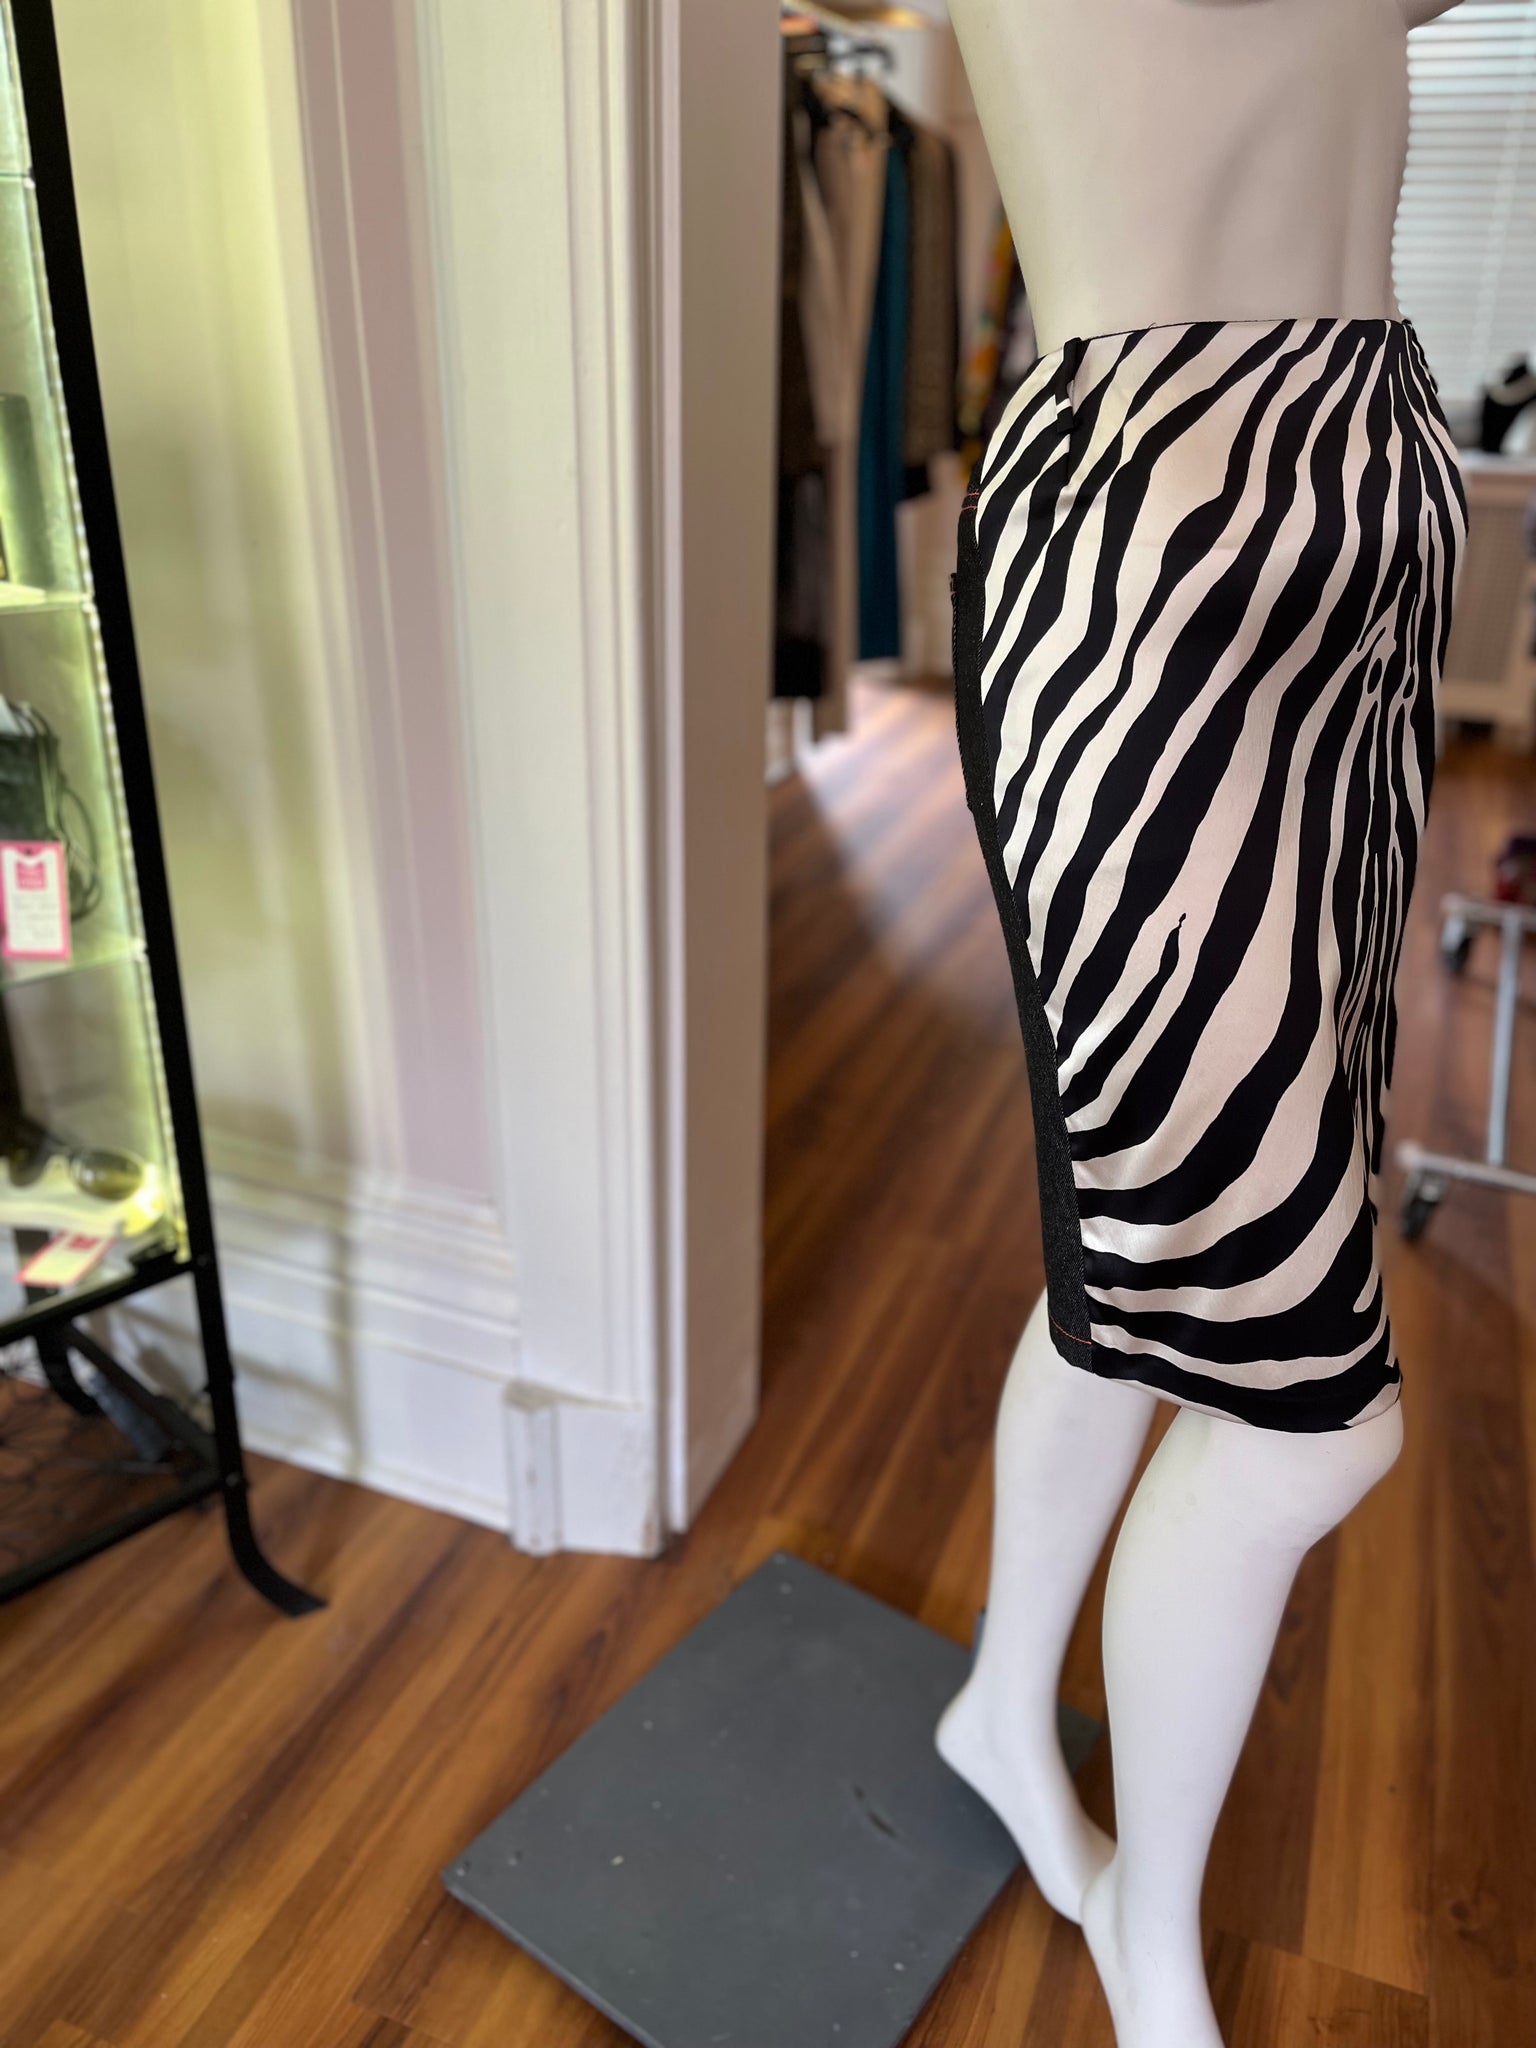 Dolce and Gabbana Zebra Silk Front and Jean Back (40 Itl)